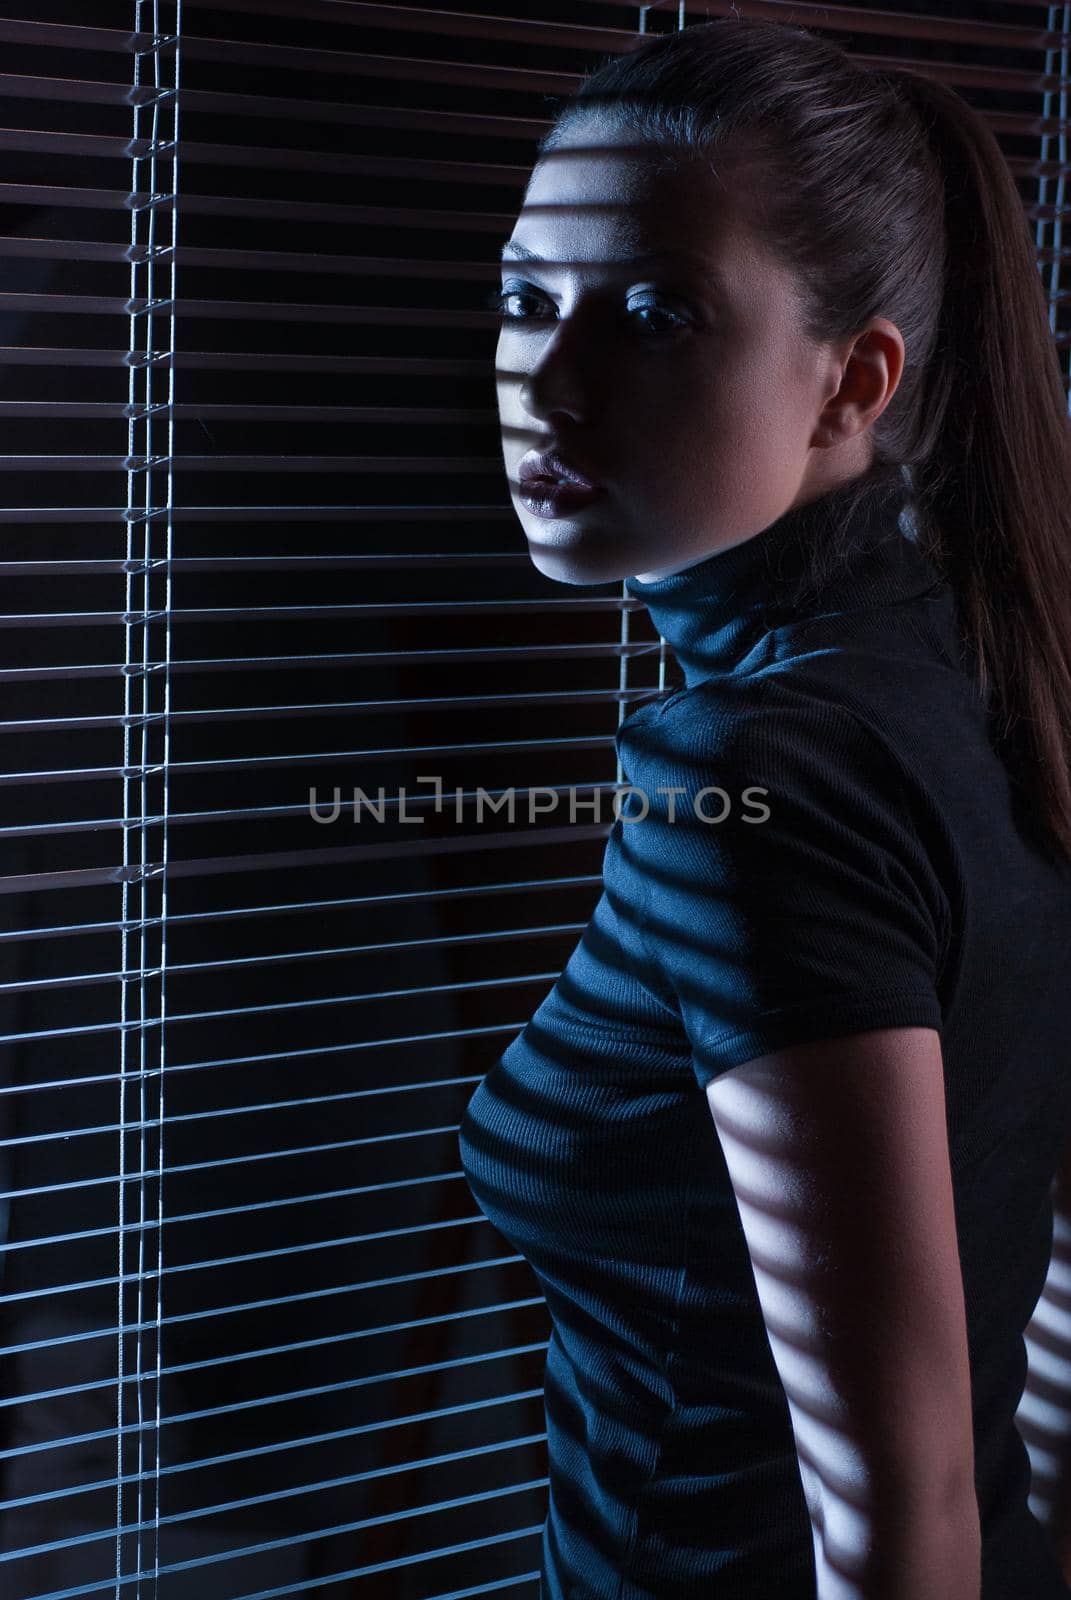 Sexy woman in black dress with jalousie looking through the window with jalousie